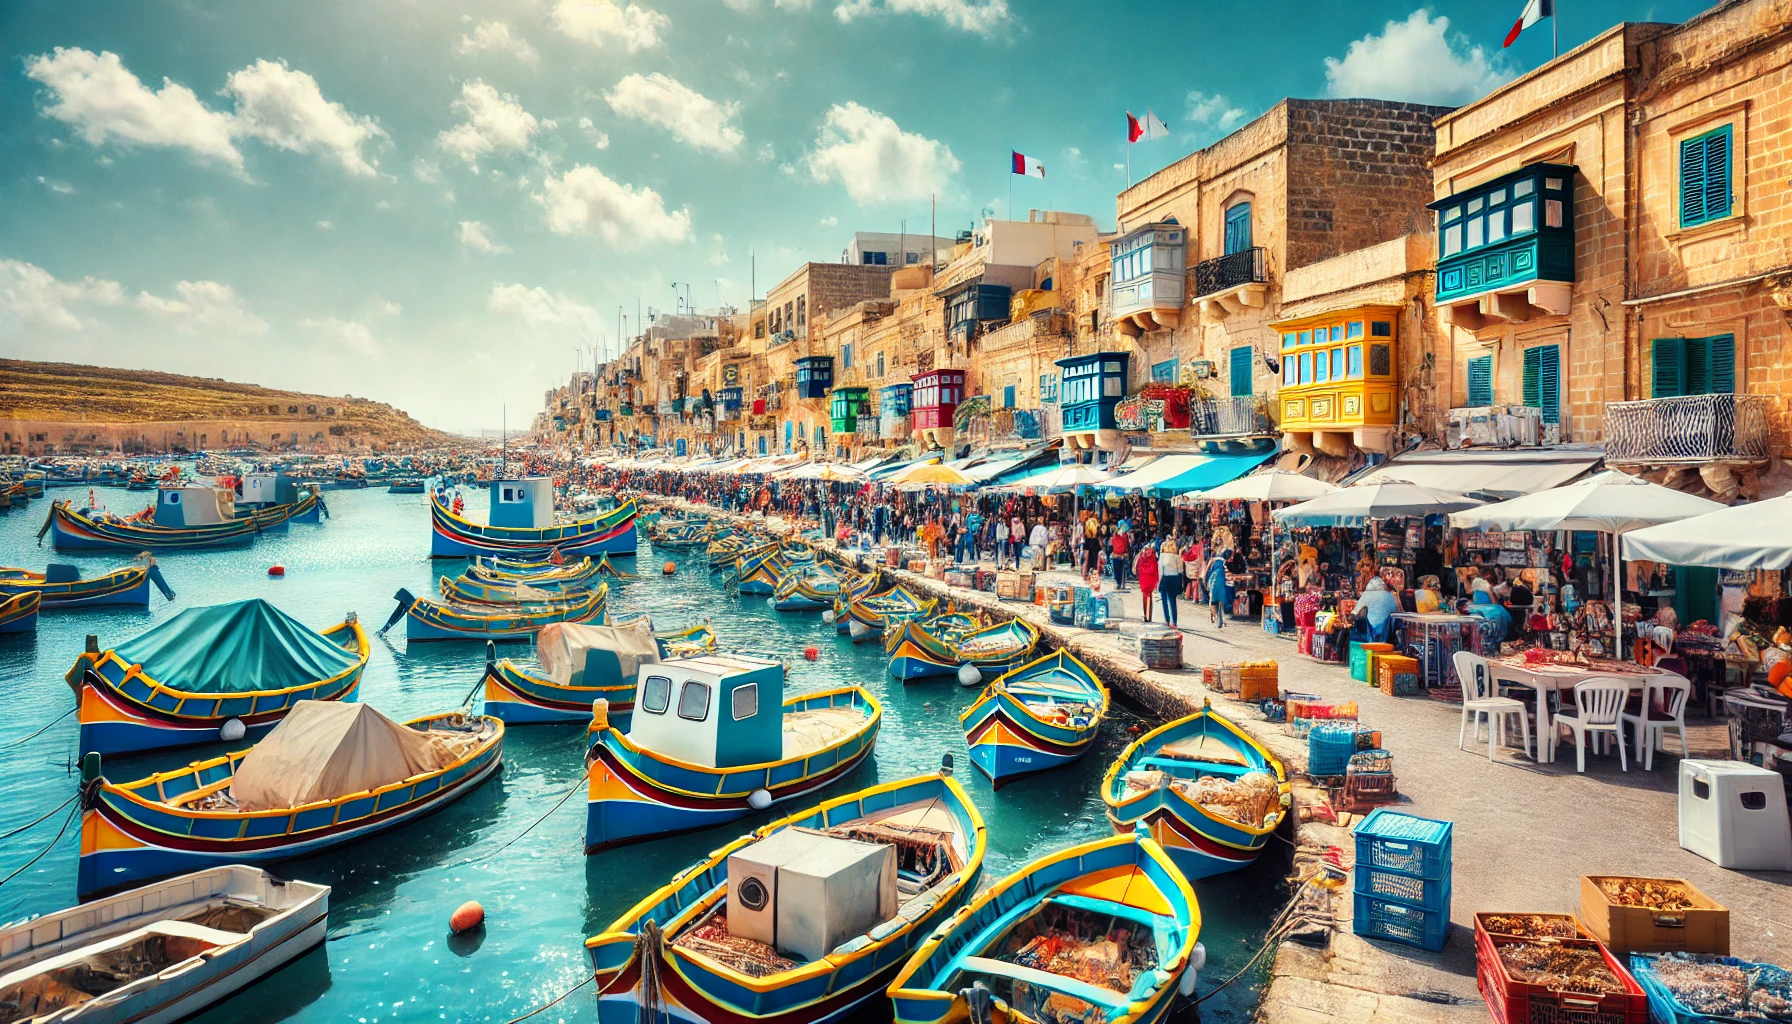 These images highlight the luxurious and vibrant experiences you can enjoy while sailing around Malta